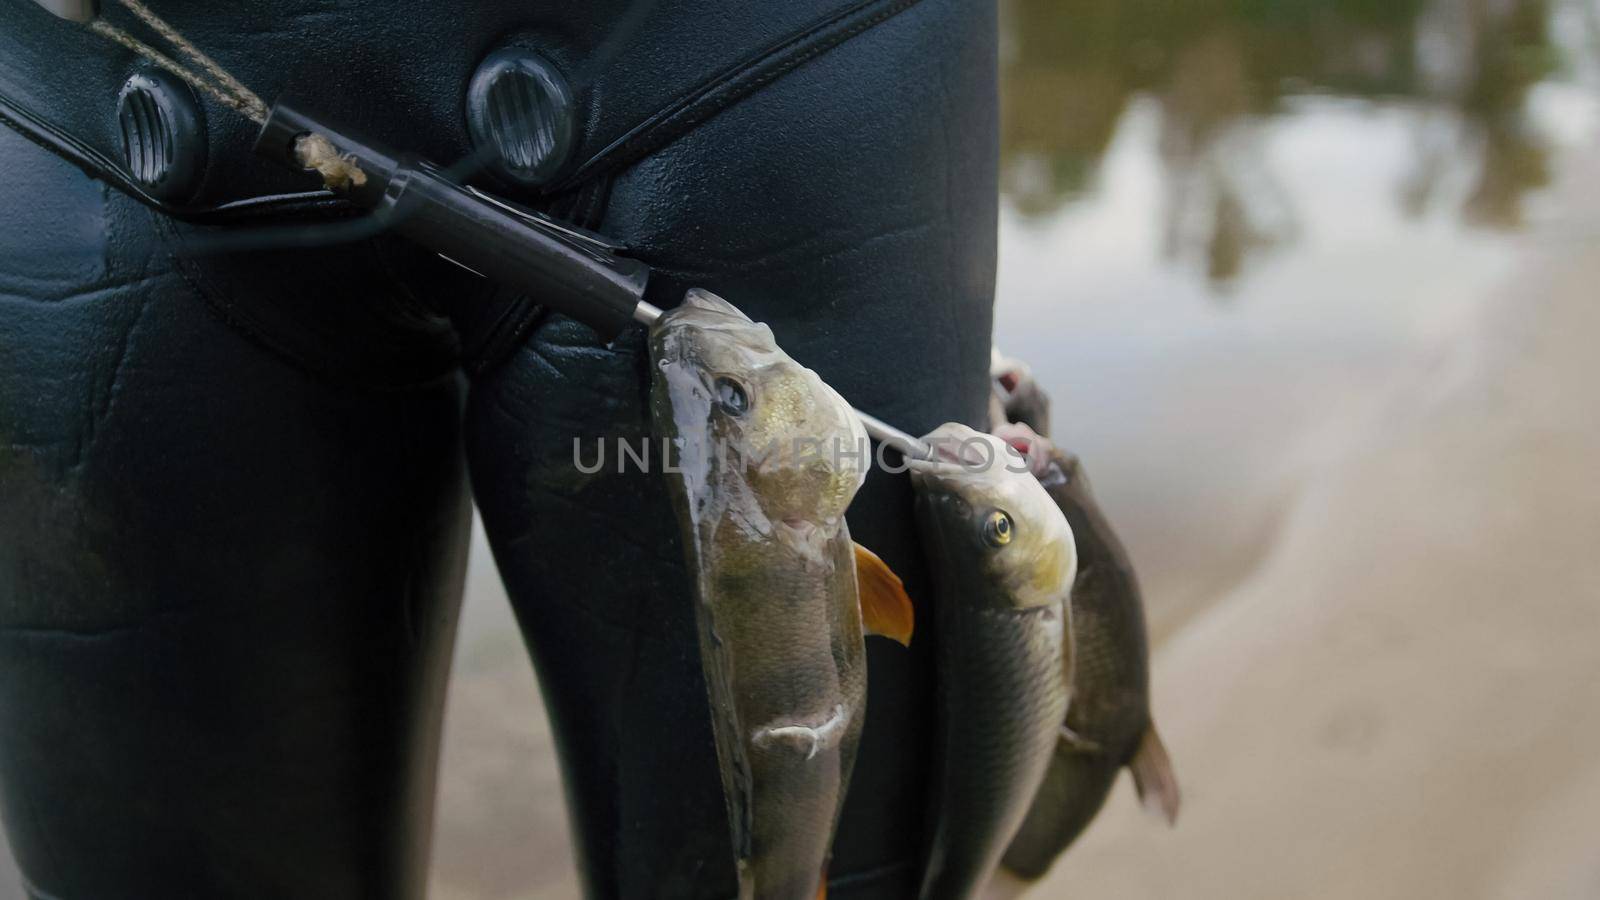 Spear fisherman shows Freshwater Fish on the belt of underwater fisherman after hunting in forest river, close up